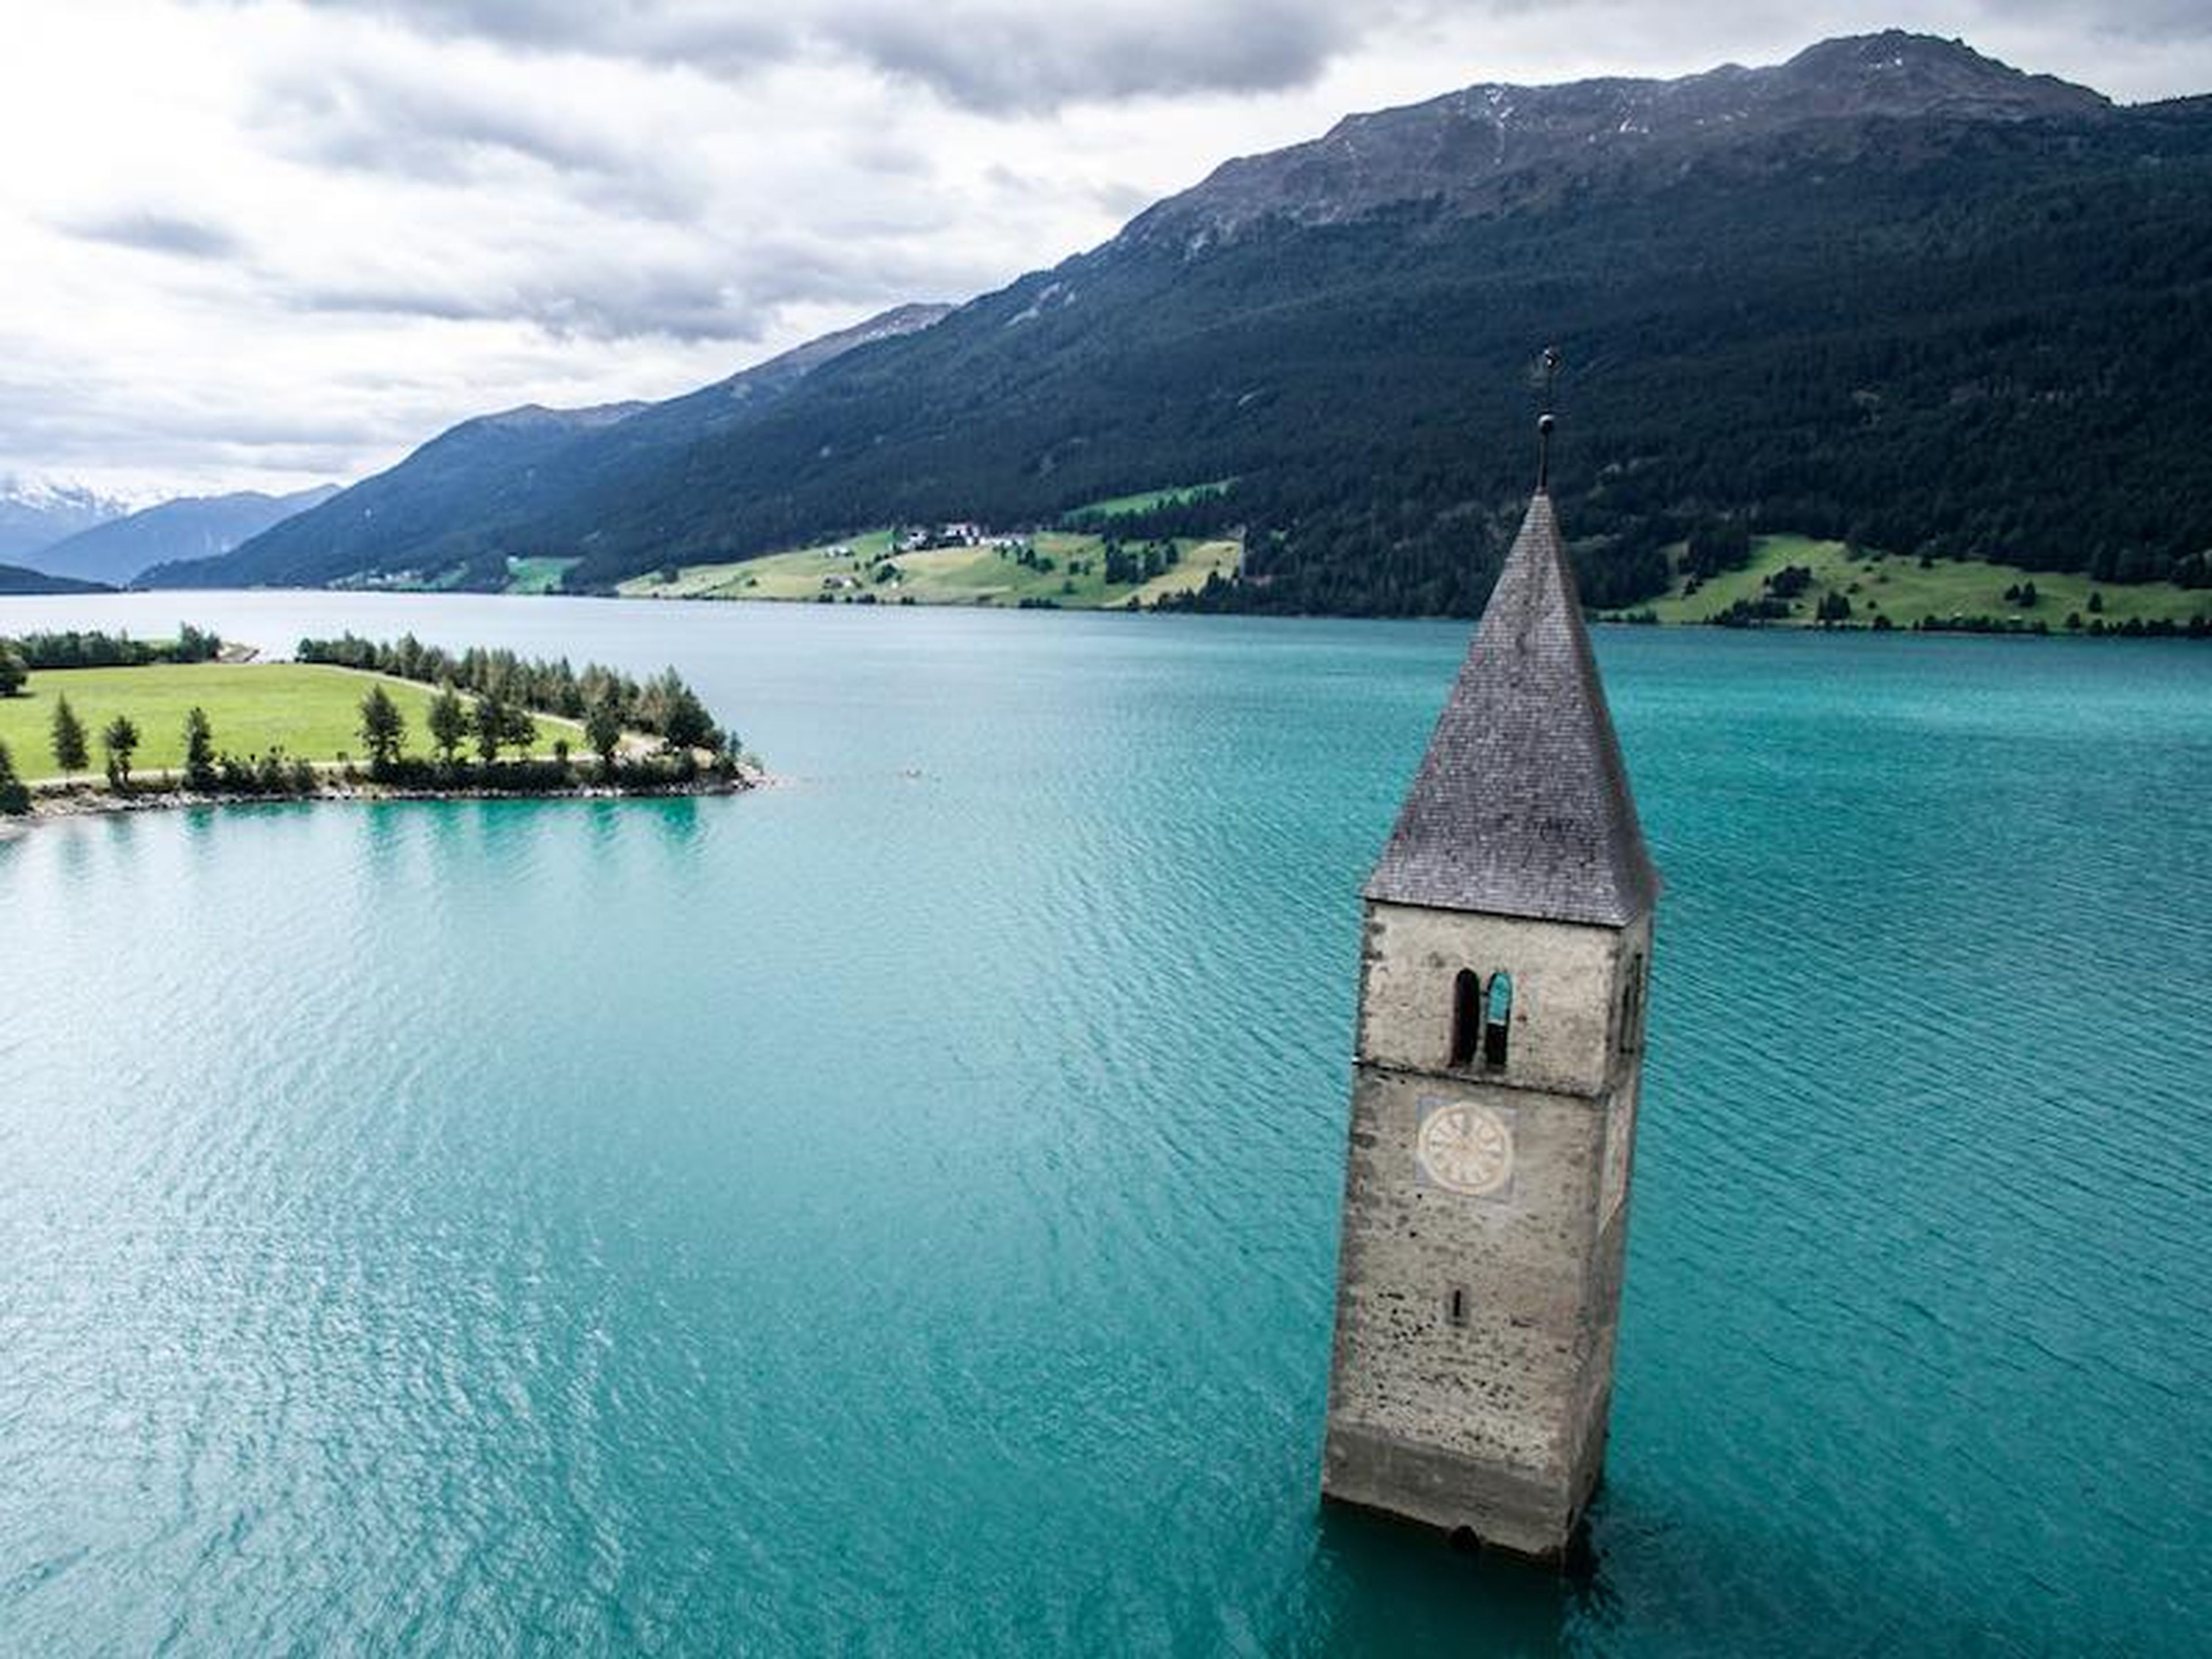 Only the tower of this church still remains above water on Lake Reschen.